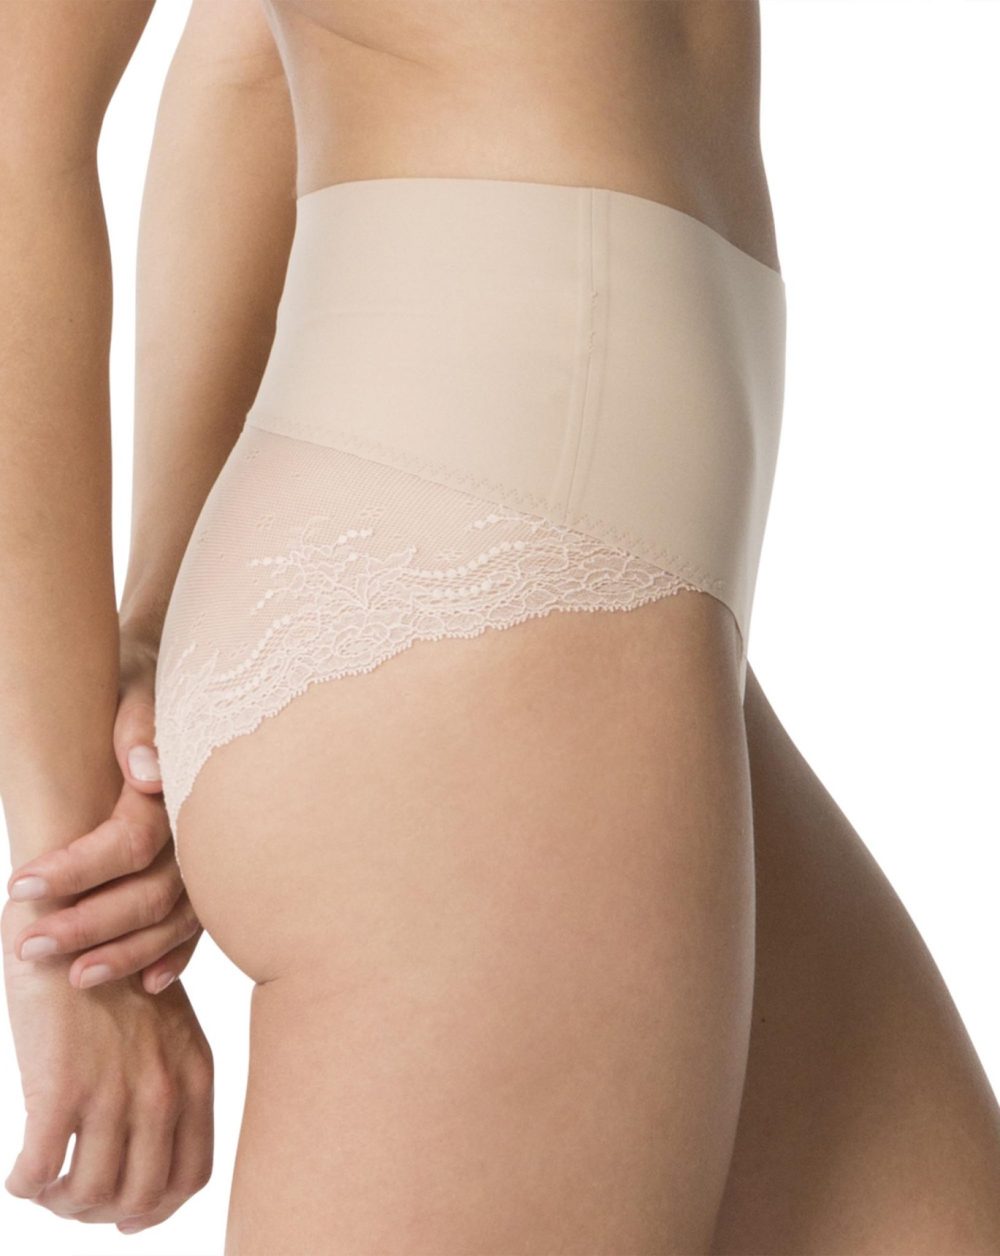 Tummy & Bottom Control with Cotton Gusset & No-Show Lace SP0415 Spanx Undie-Tectable Womens Nylon Cheeky Panty for Light Waist 